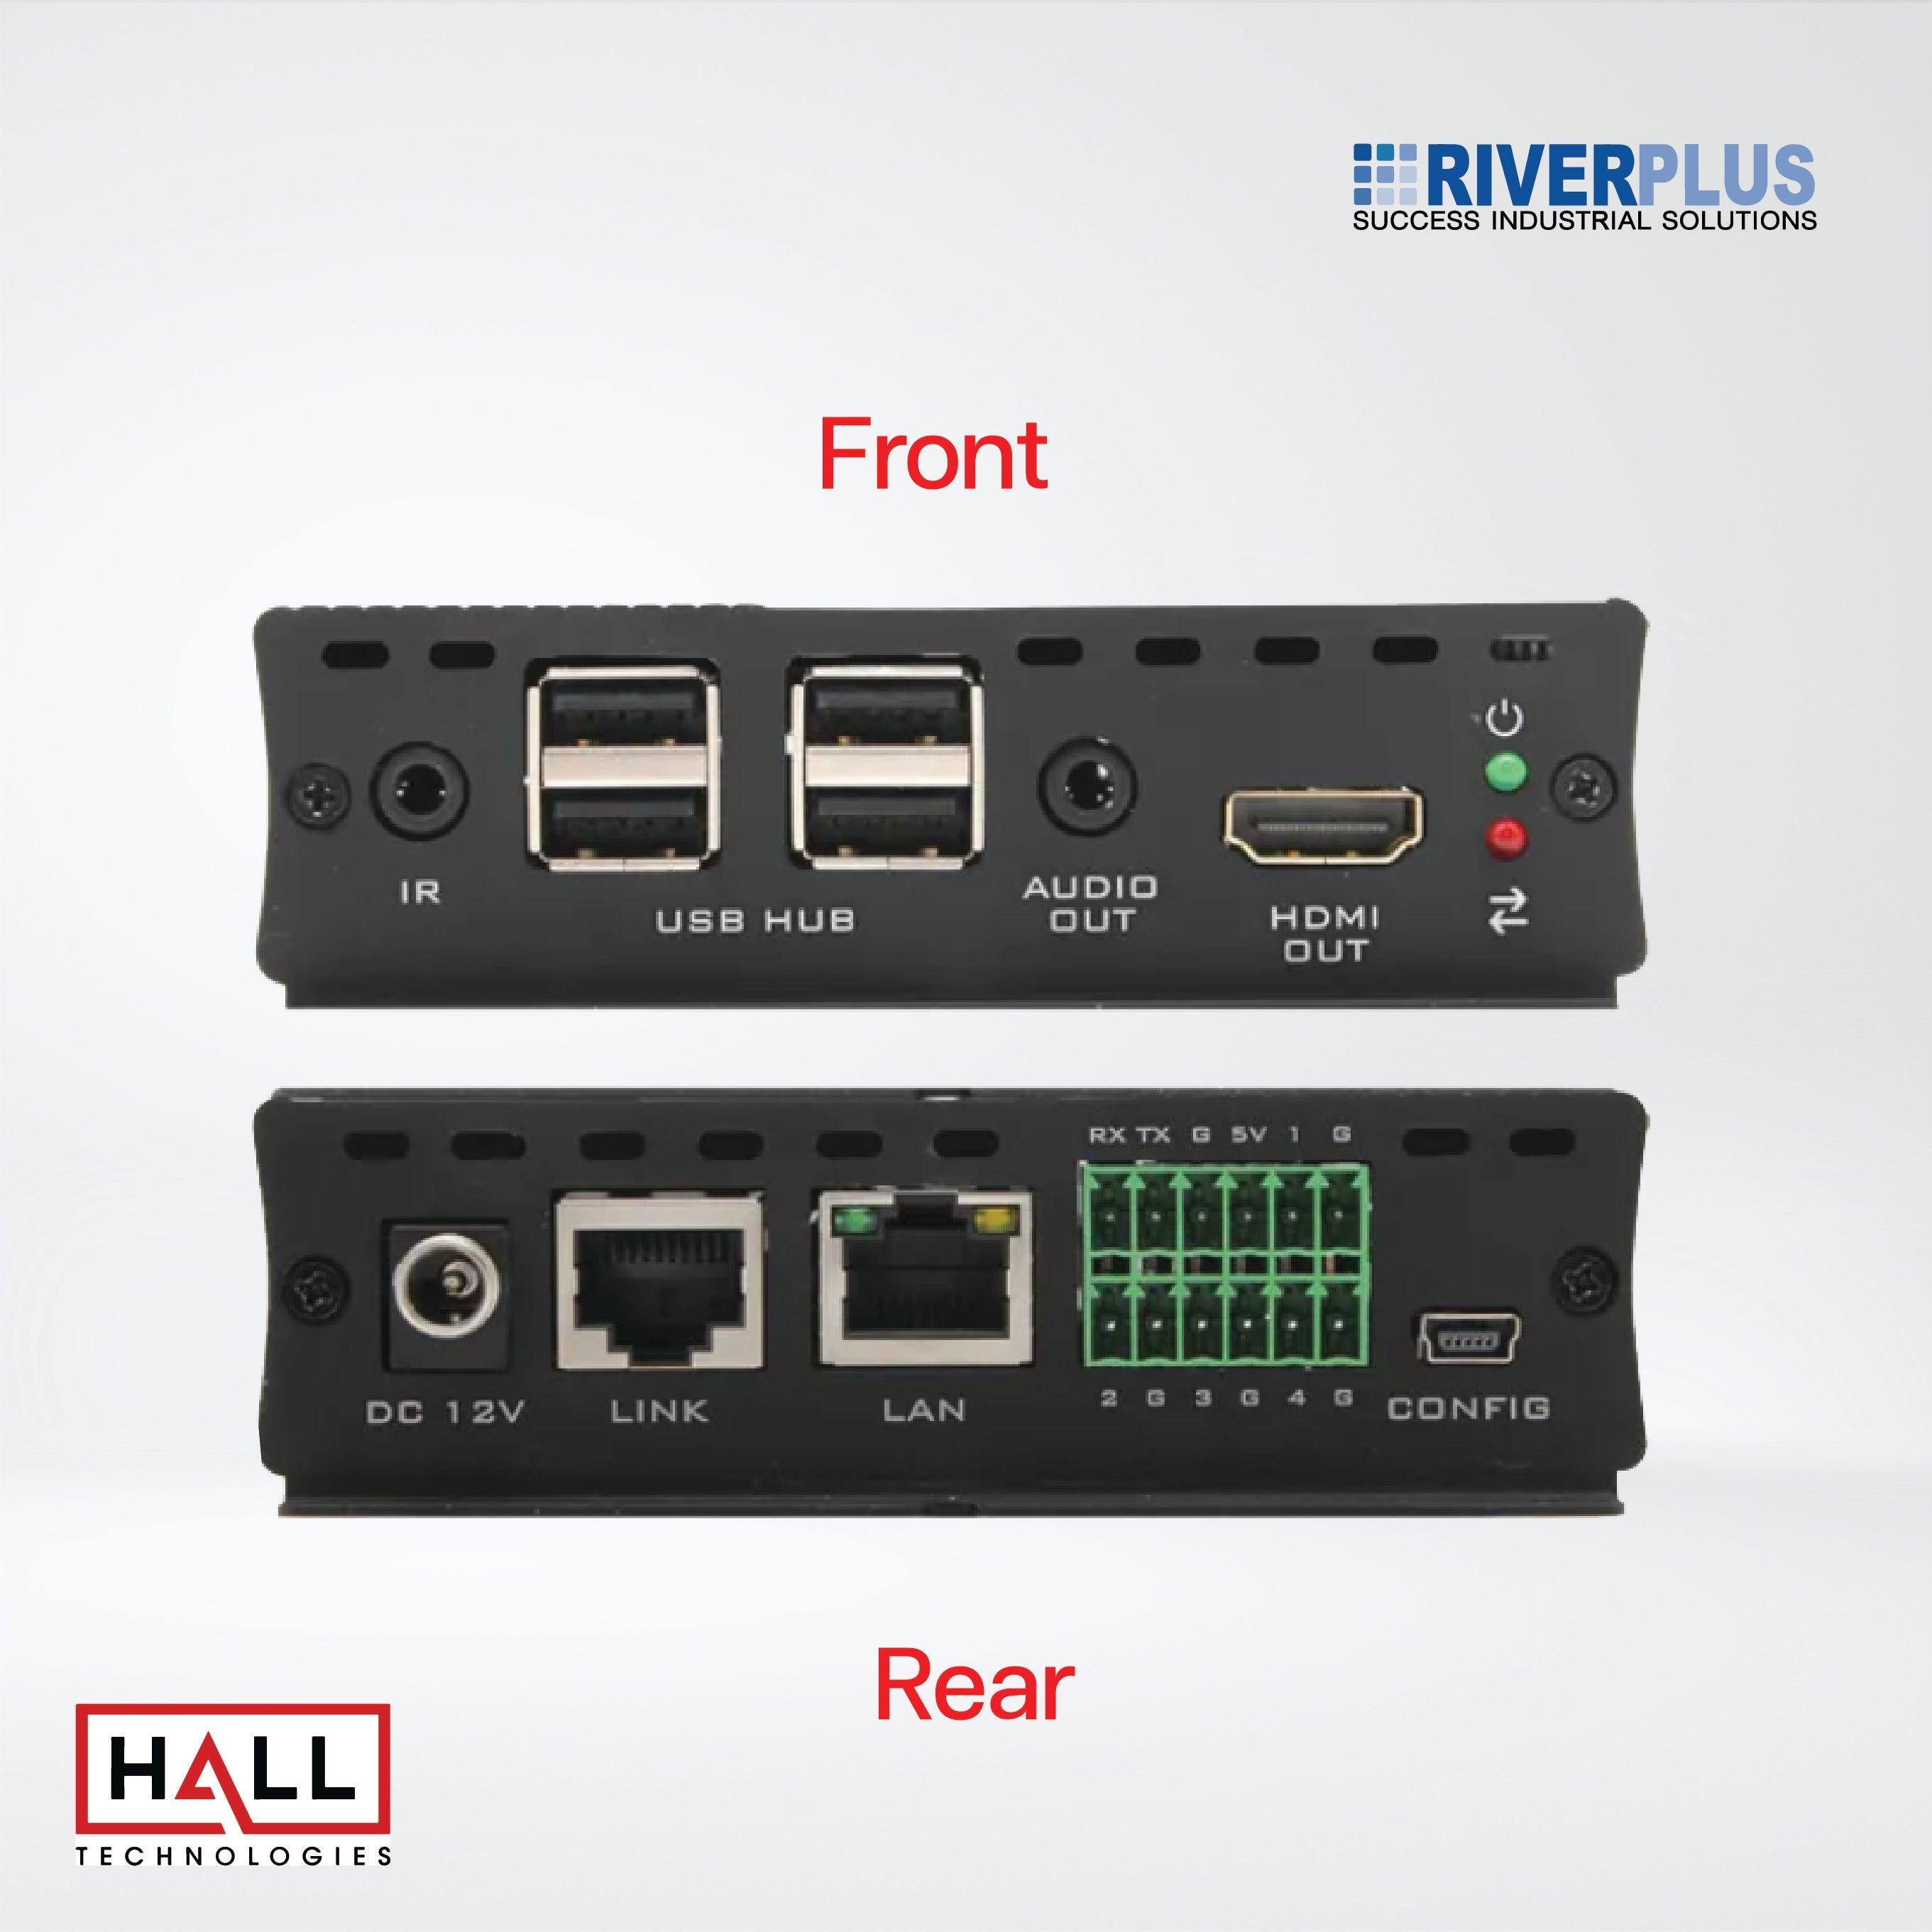 EX-HDU-R HDMI and USB Extension on CAT6 with Audio and Integrated Control Receiver - Riverplus